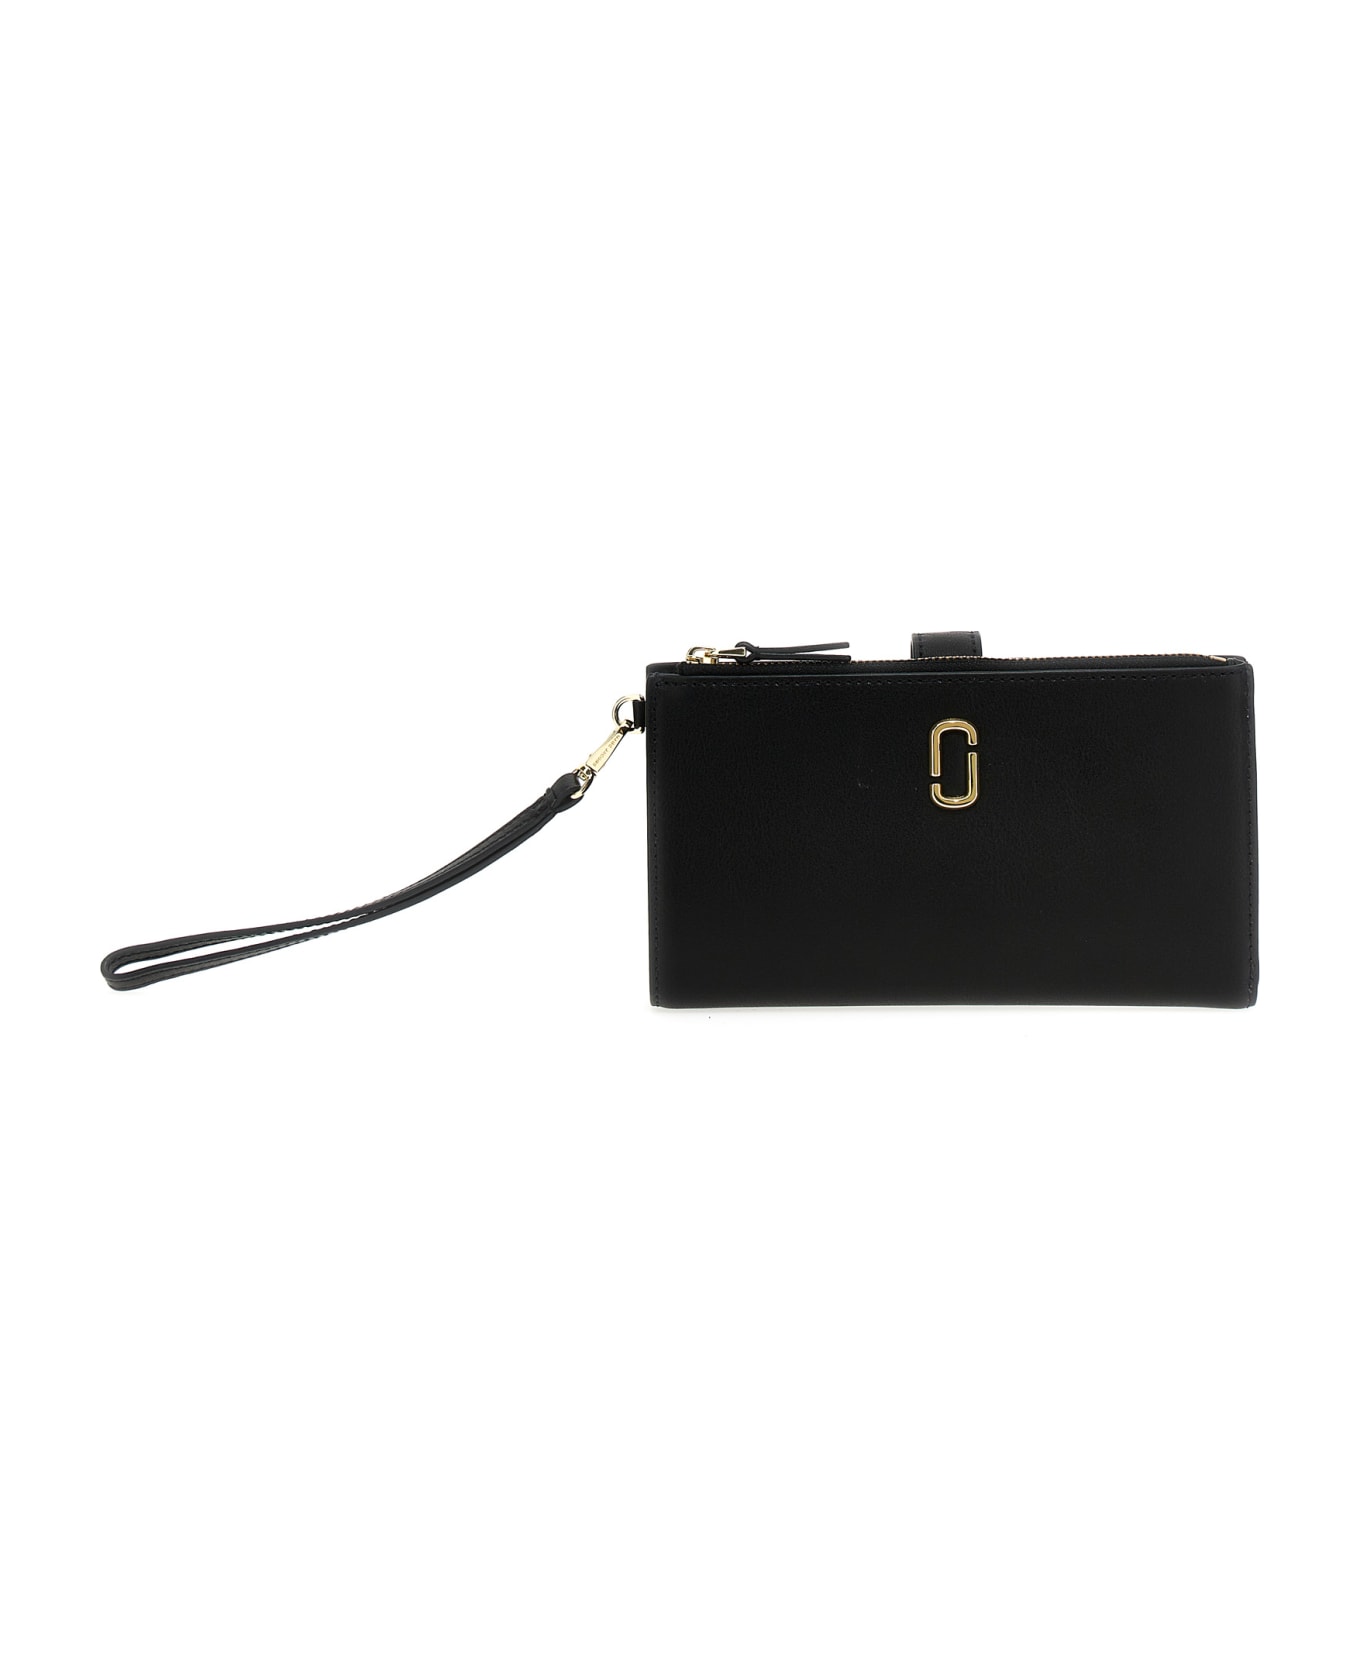 Marc Jacobs The J Phone Wristlet Clutch - Black クラッチバッグ